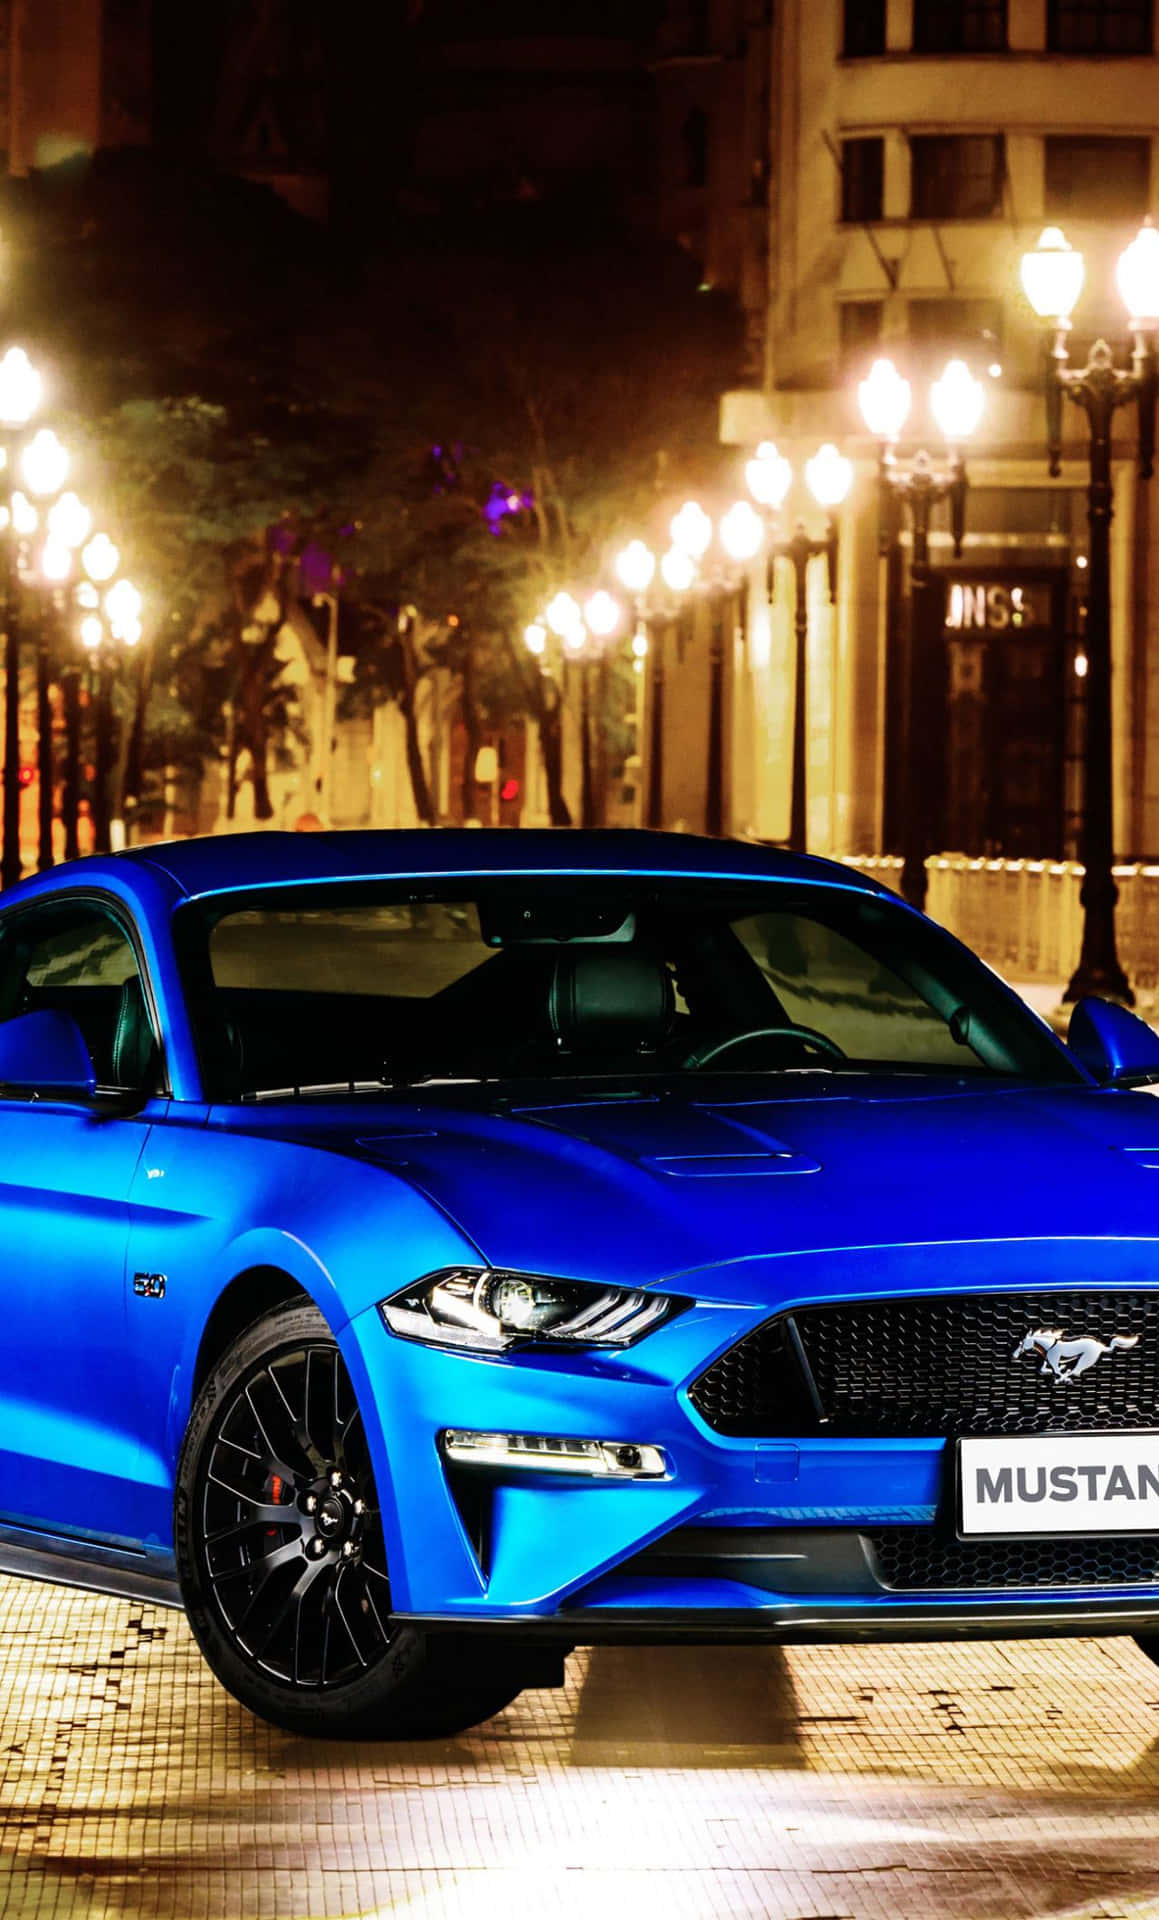 The Blue 2019 Ford Mustang Gt Is Parked On A City Street Wallpaper